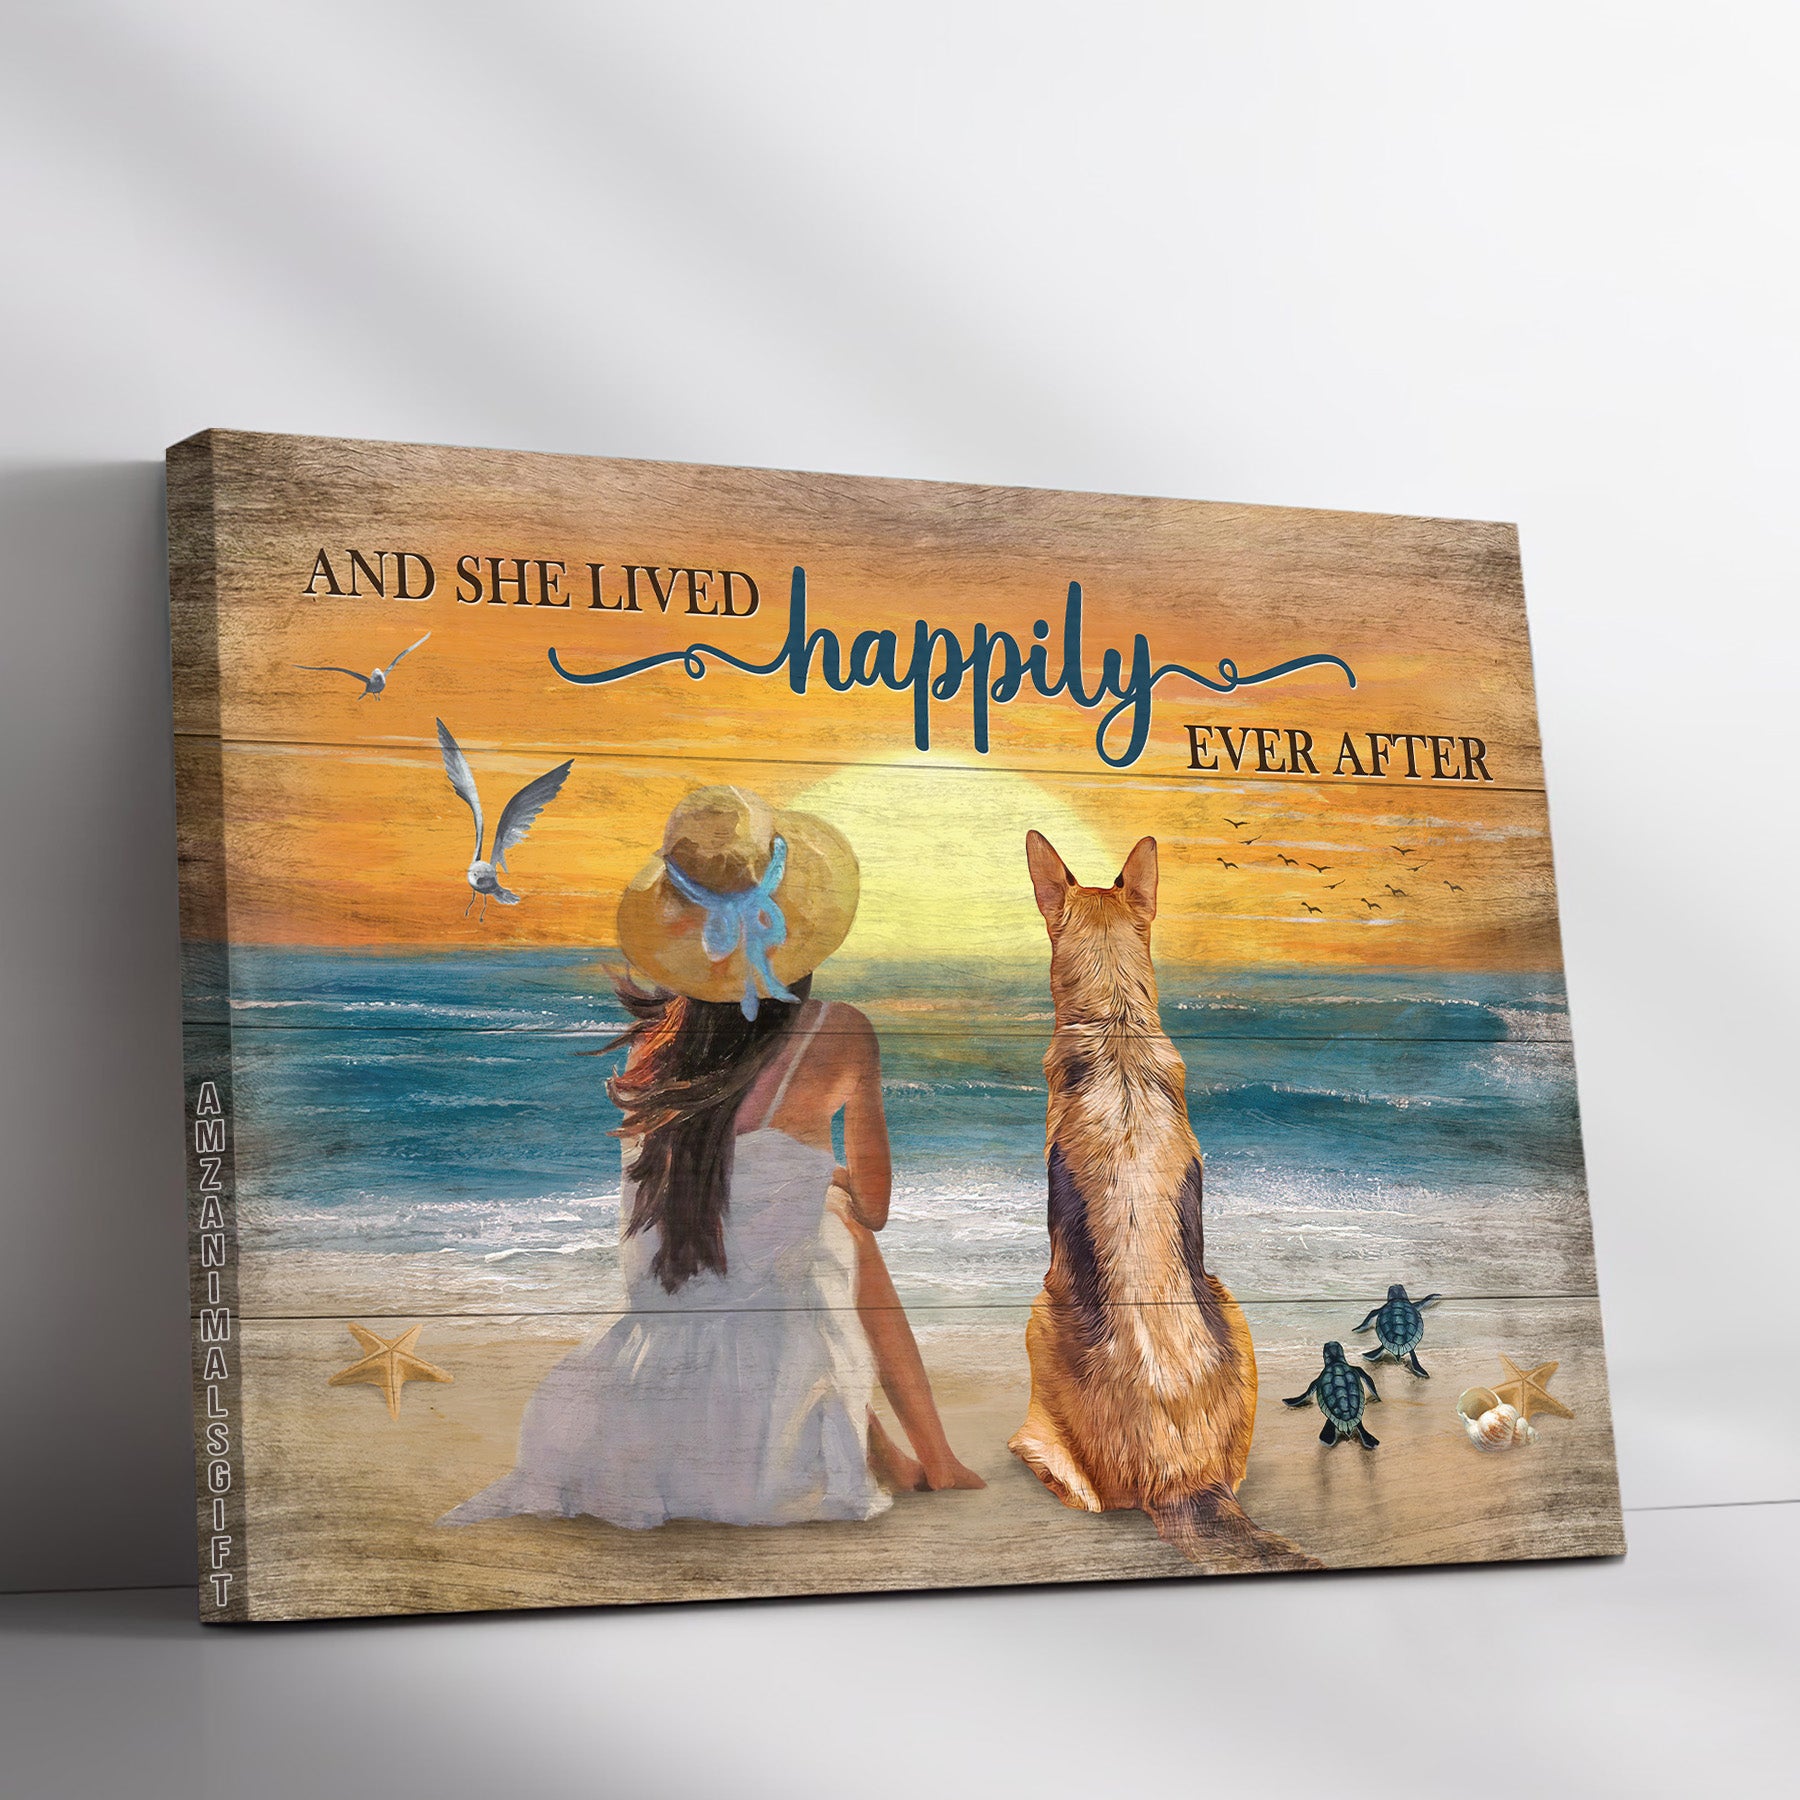 German Shepherd & Jesus Premium Wrapped Landscape Canvas - Girl Painting, Pretty Sunset, German Shepherd, And She Lived Happily - Gift For Christian